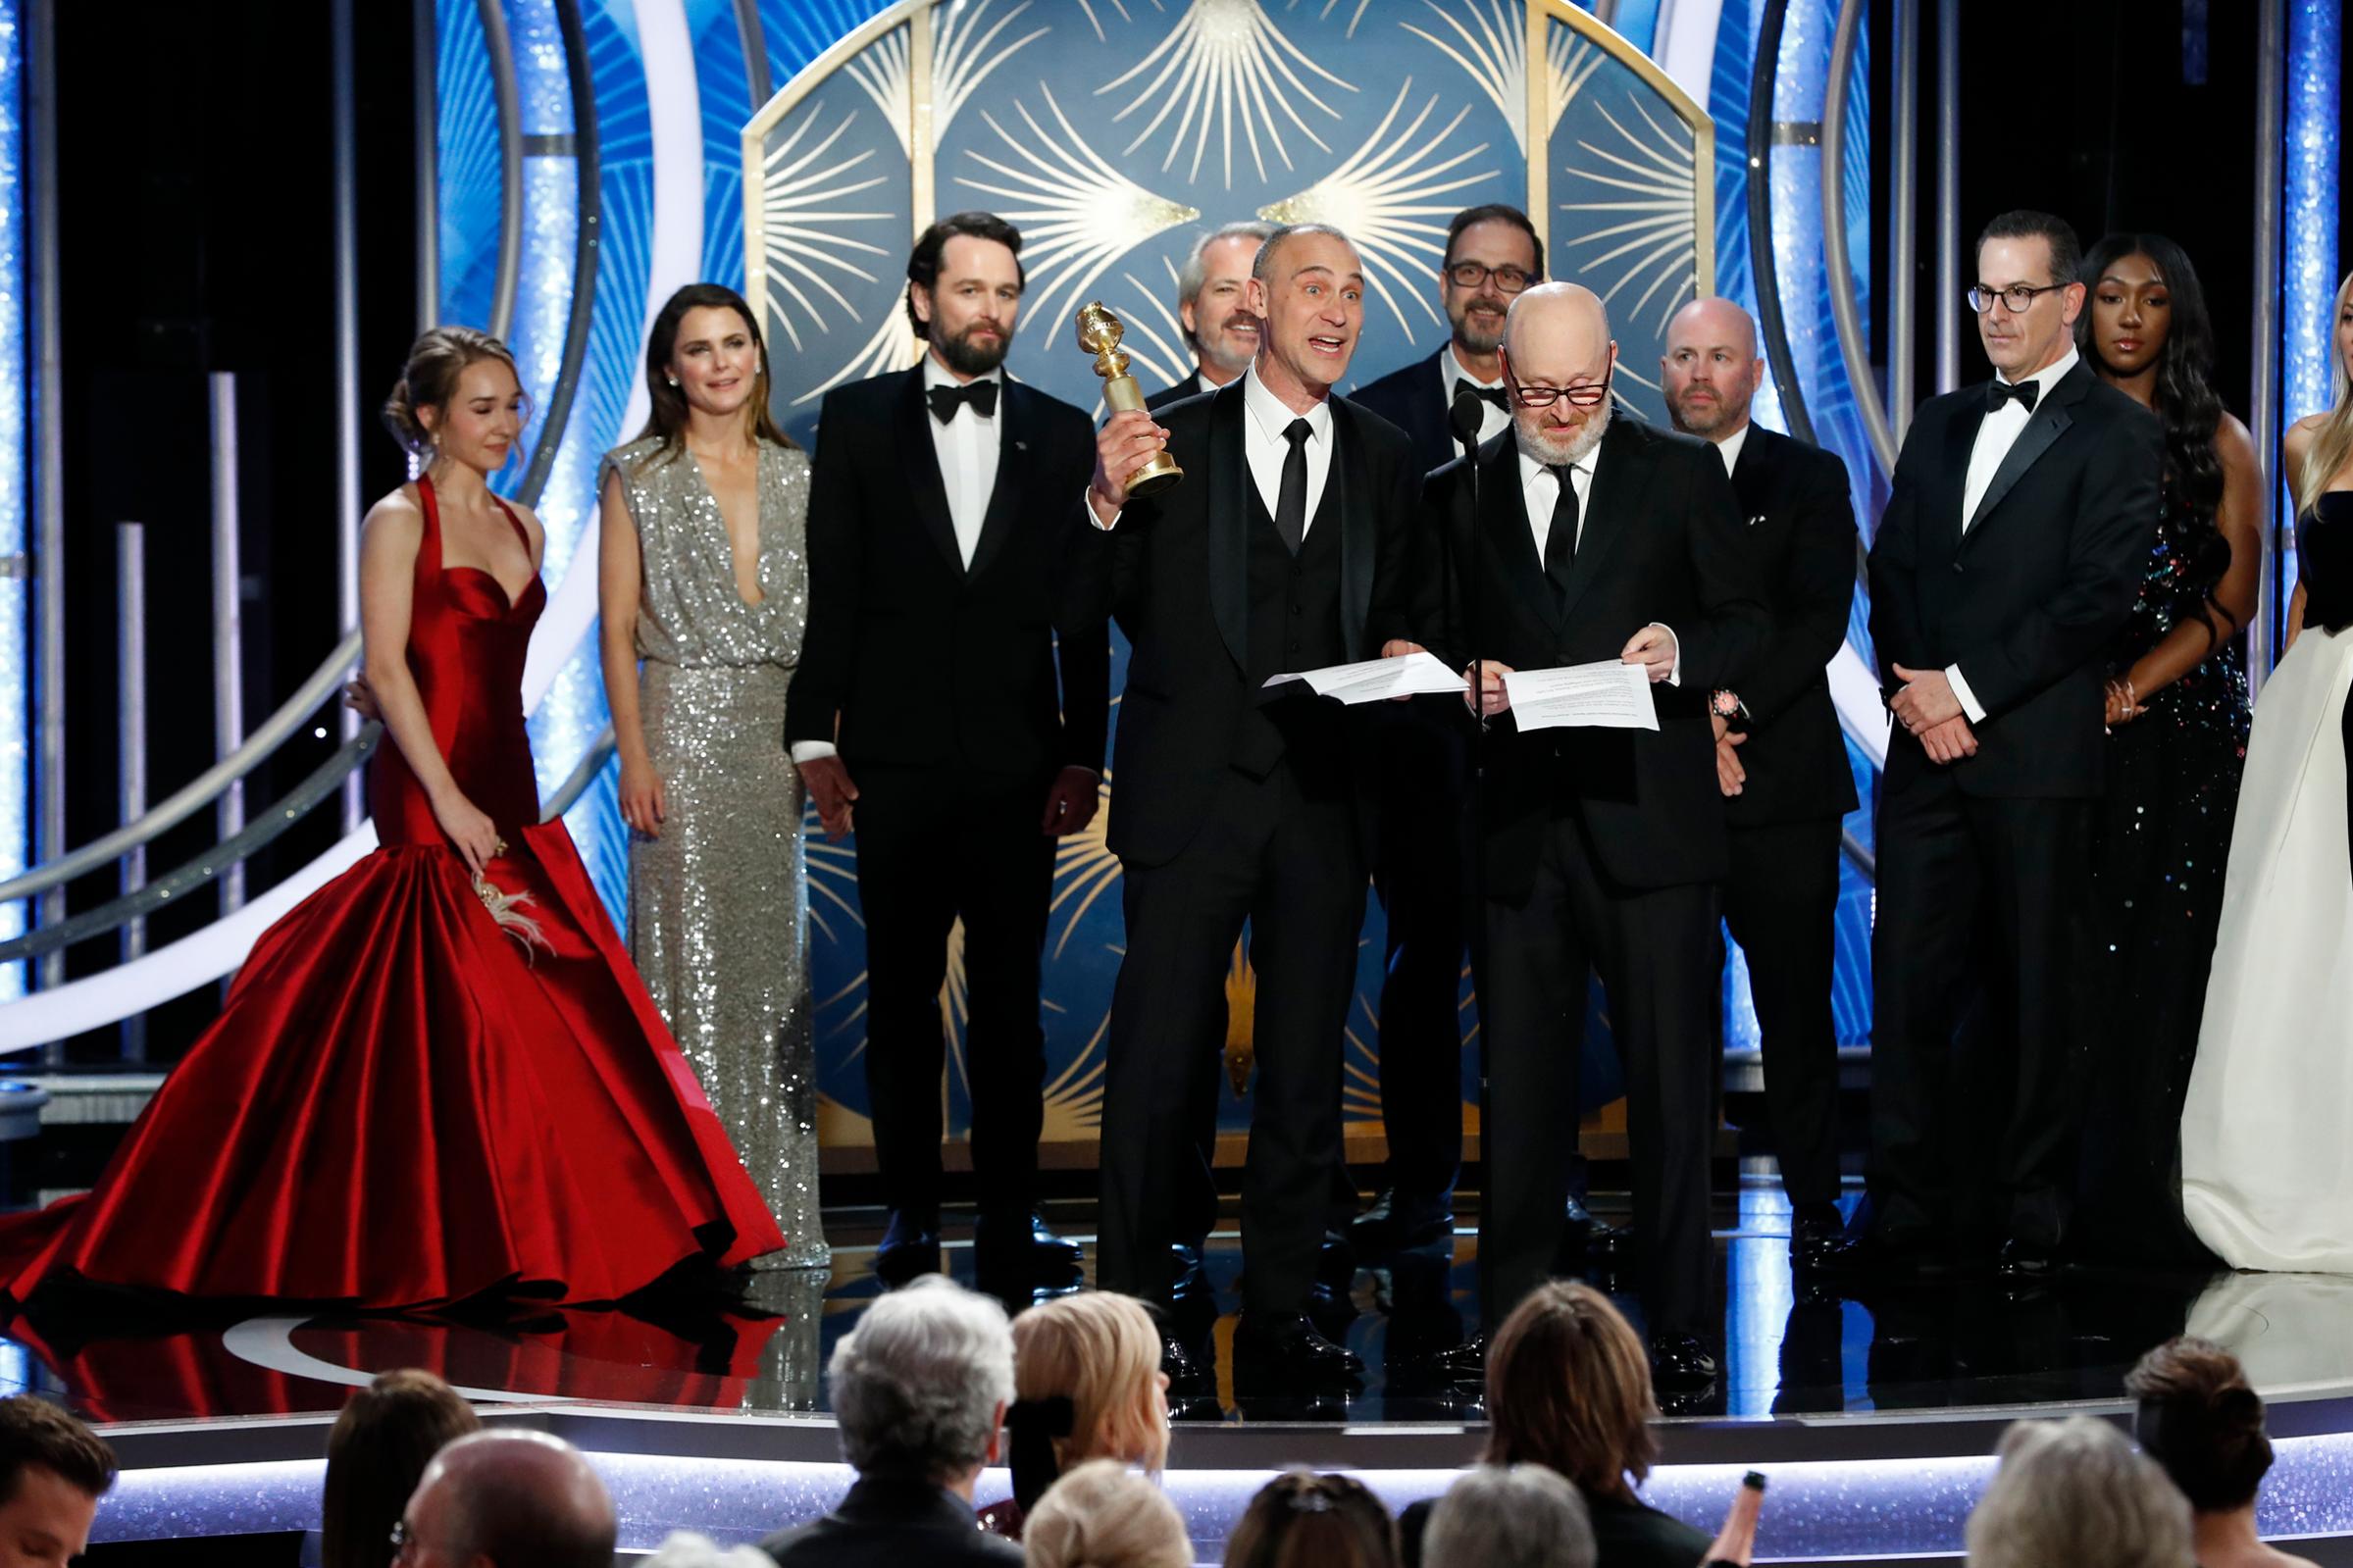 Joe Weinberg (R) from “The Americans” accept the Best Television Series – Drama award onstage during the 76th Annual Golden Globe Awards.